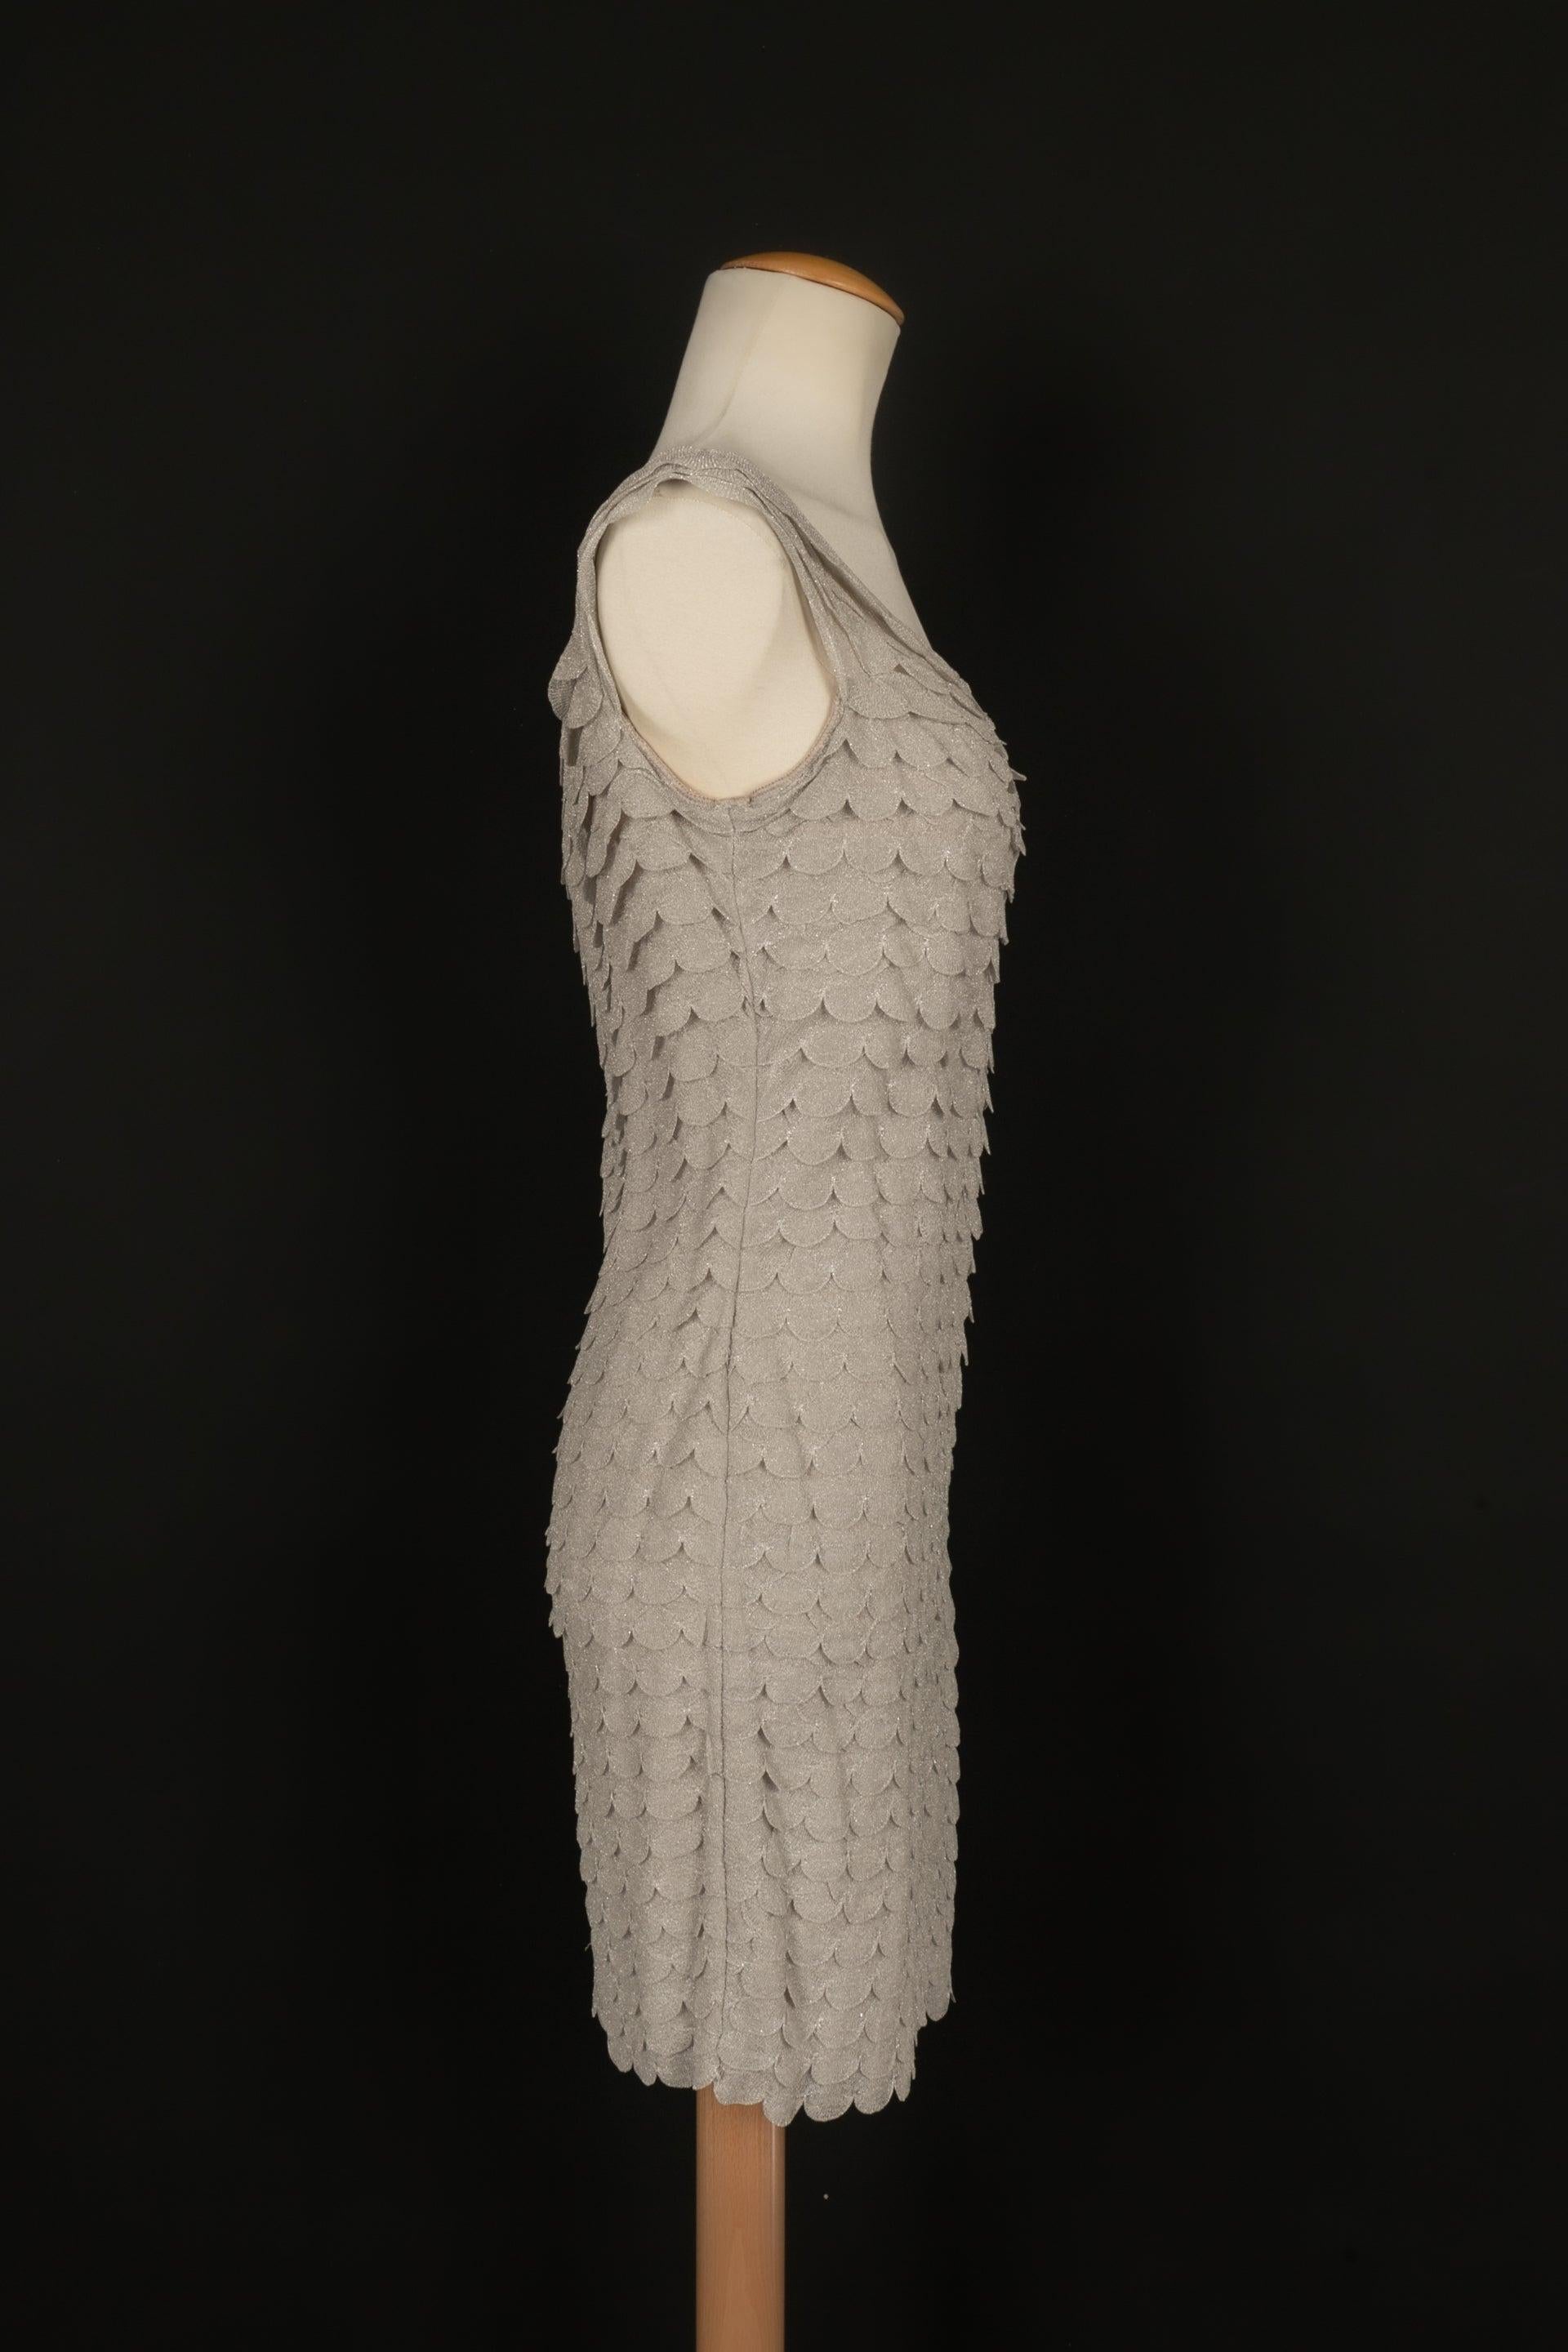 Dior - (Made in France) Silvery lurex yarn sleeveless short dress. Indicated size 40FR.

Additional information:
Condition: Very good condition
Dimensions: Chest: 43 cm - 
Waist: 36 cm - 
Hips: 44 cm - 
Length: 87 cm

Seller reference: VR186
